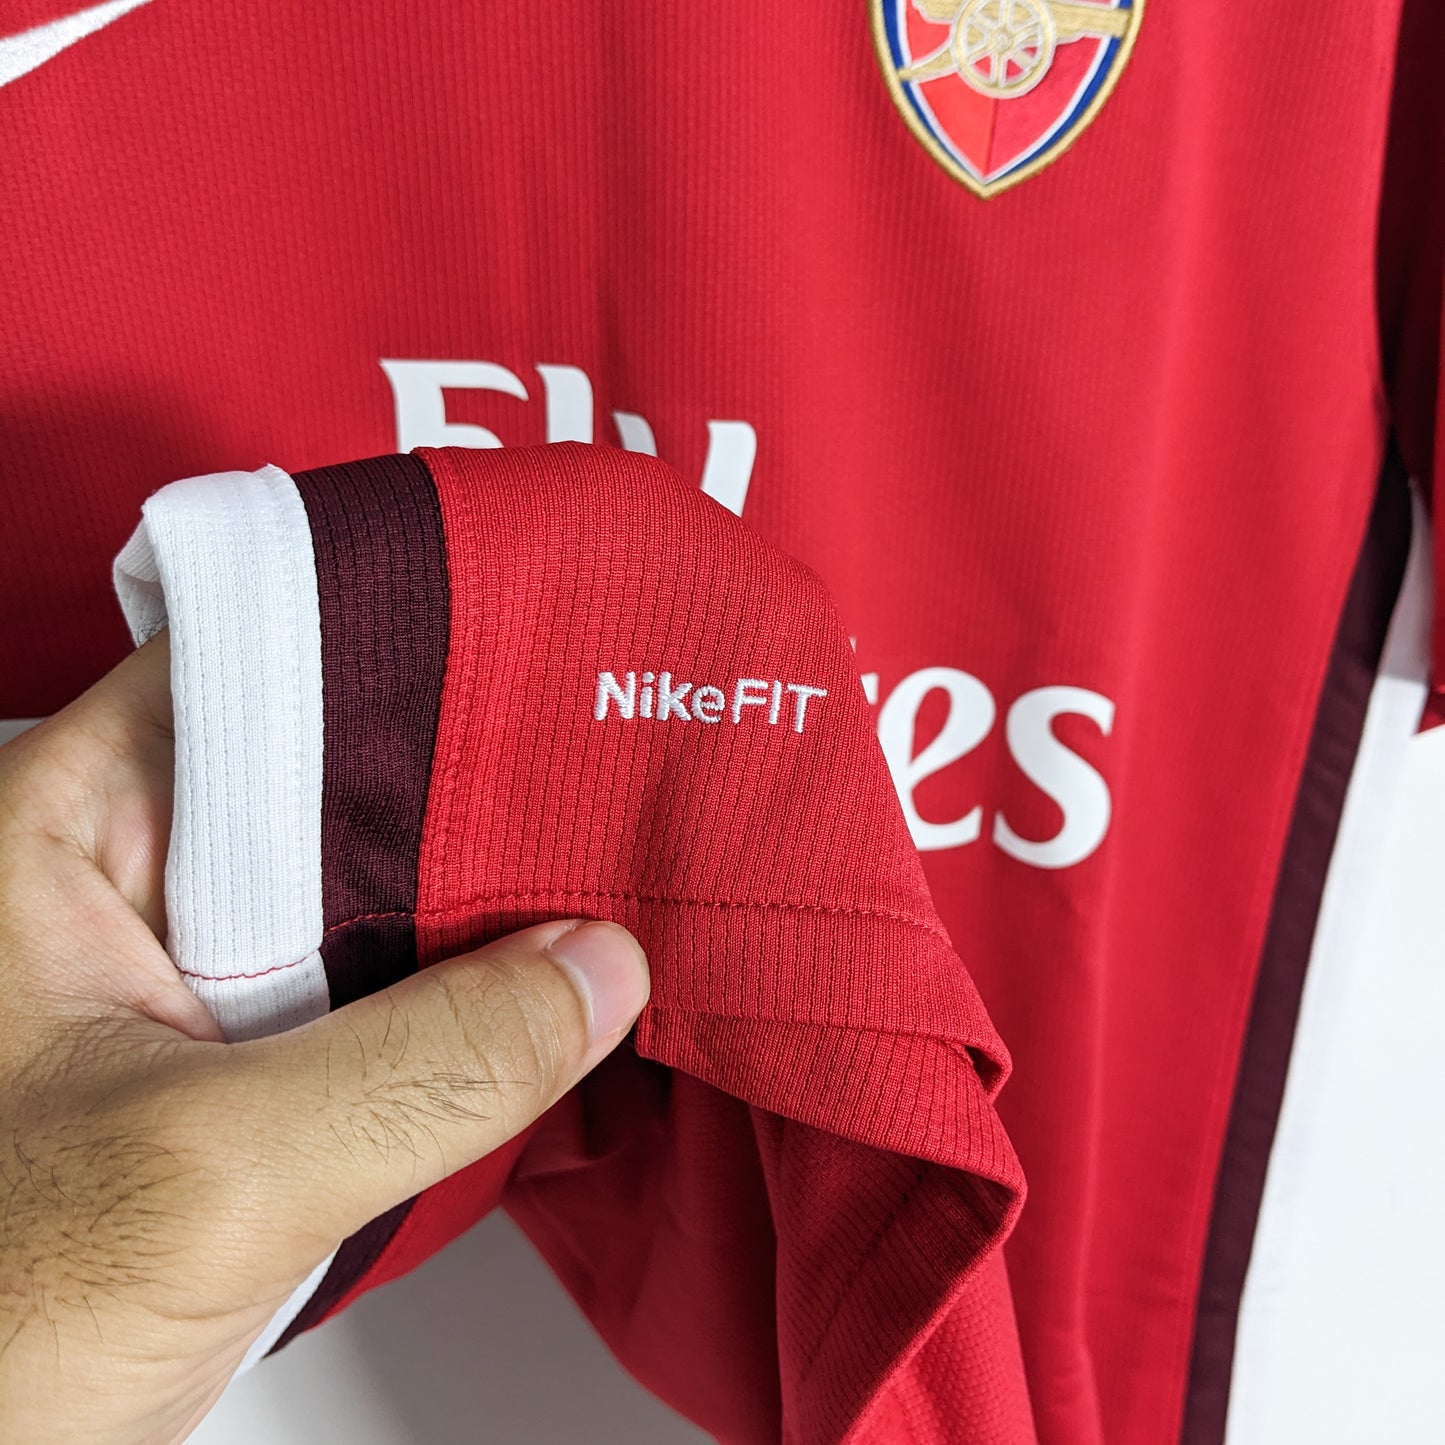 Authentic Arsenal 2008-2010 - Rosicky #14 Size L fit XL